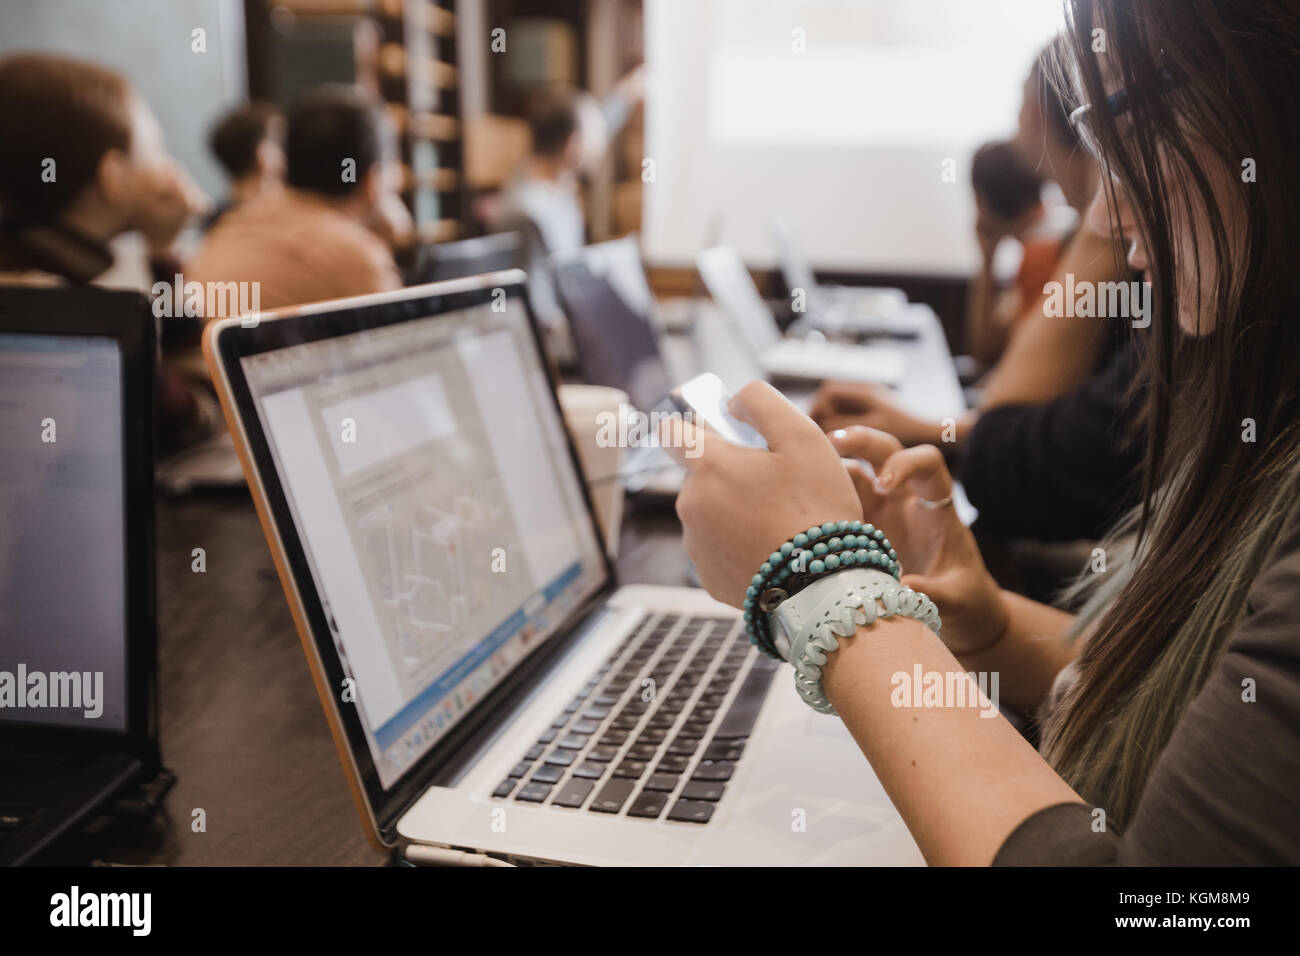 Students in classroom working with laptops Stock Photo